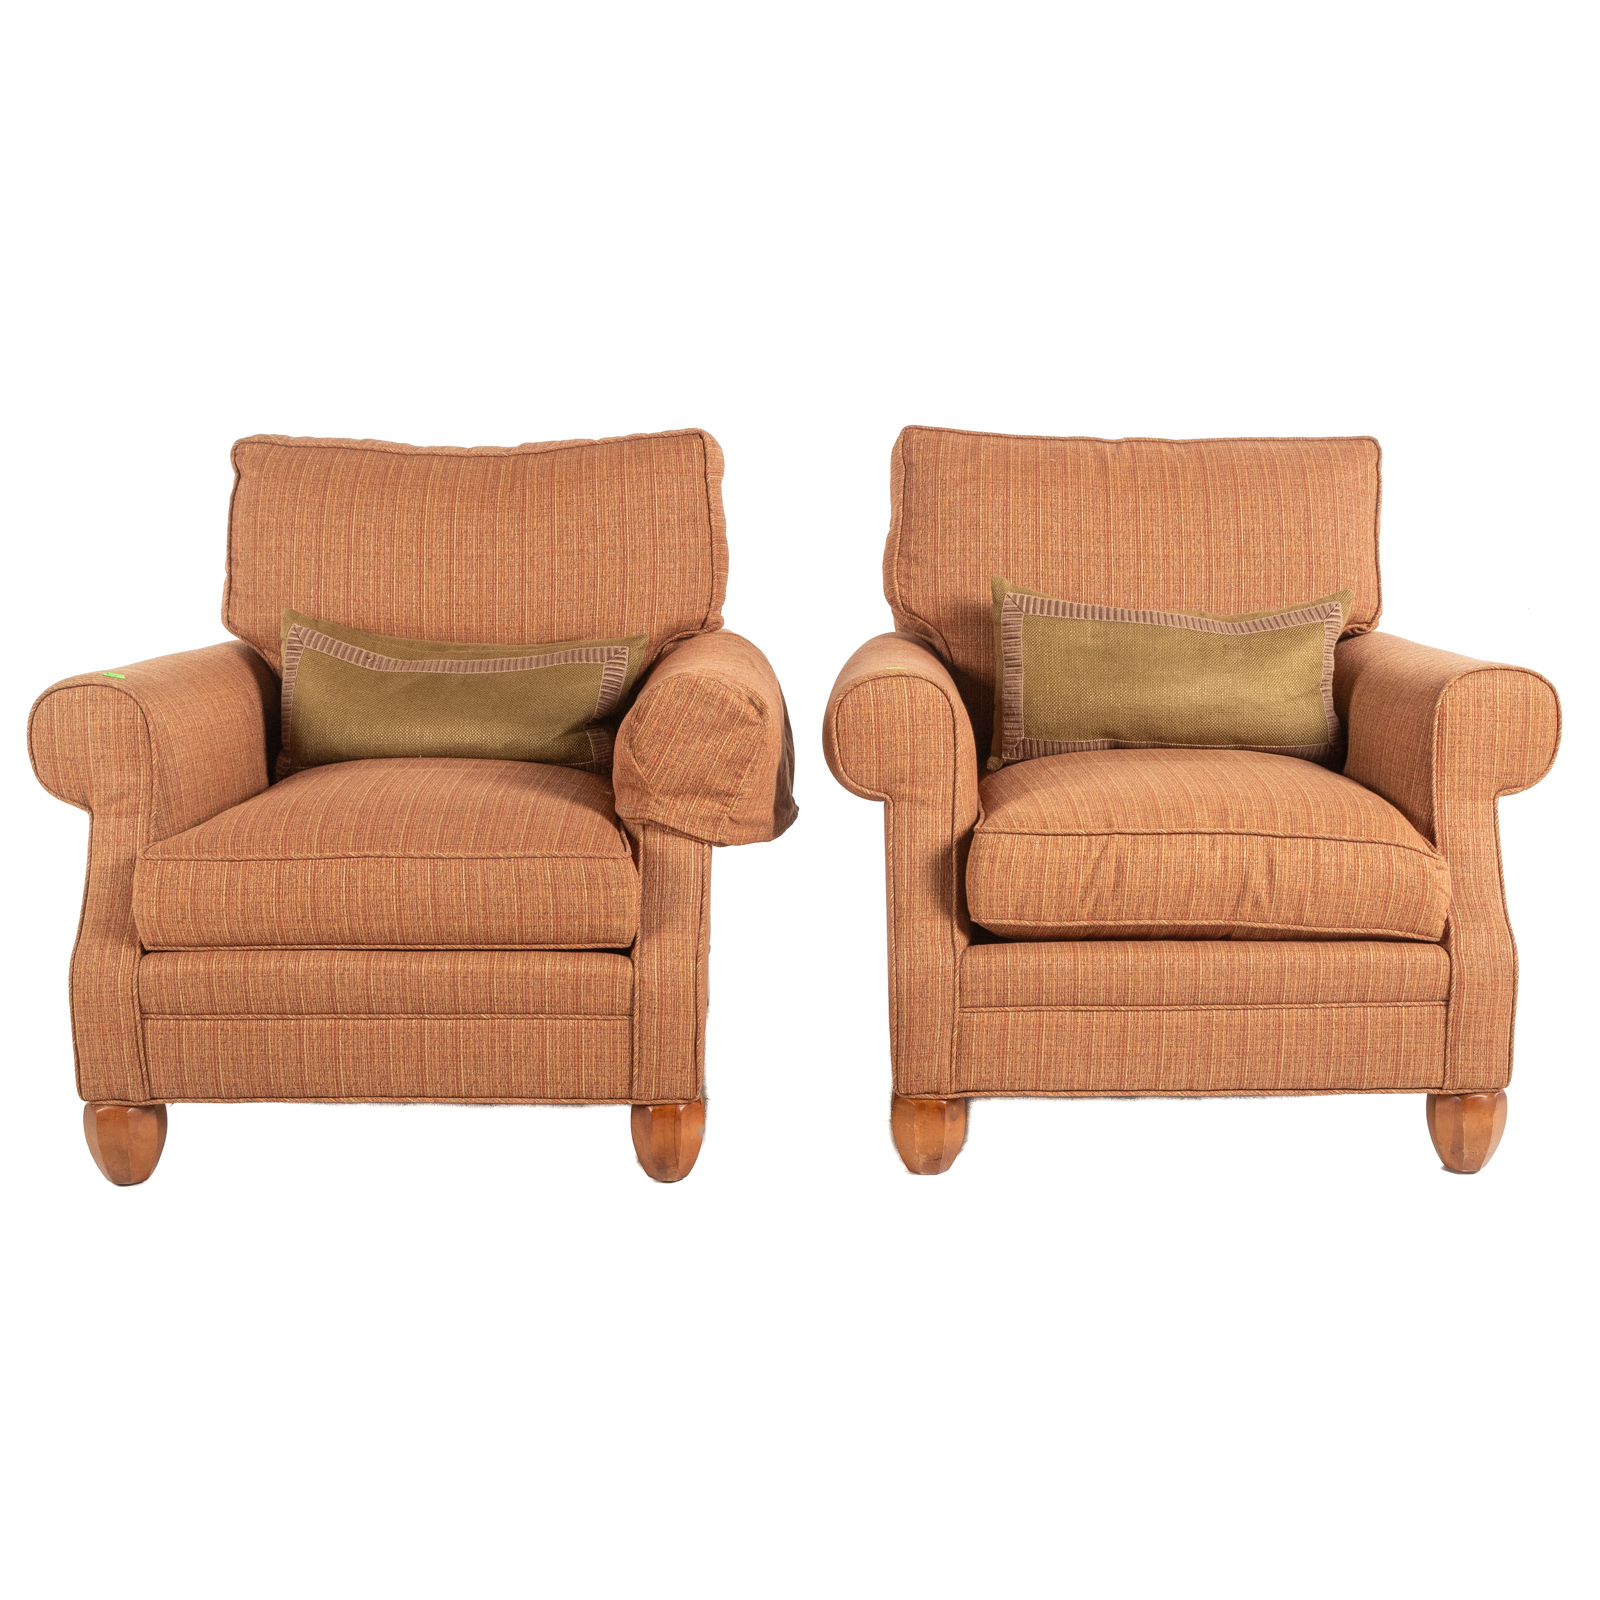 A PAIR OF CONTEMPORARY CUSTOM UPHOLSTERED 3cae15